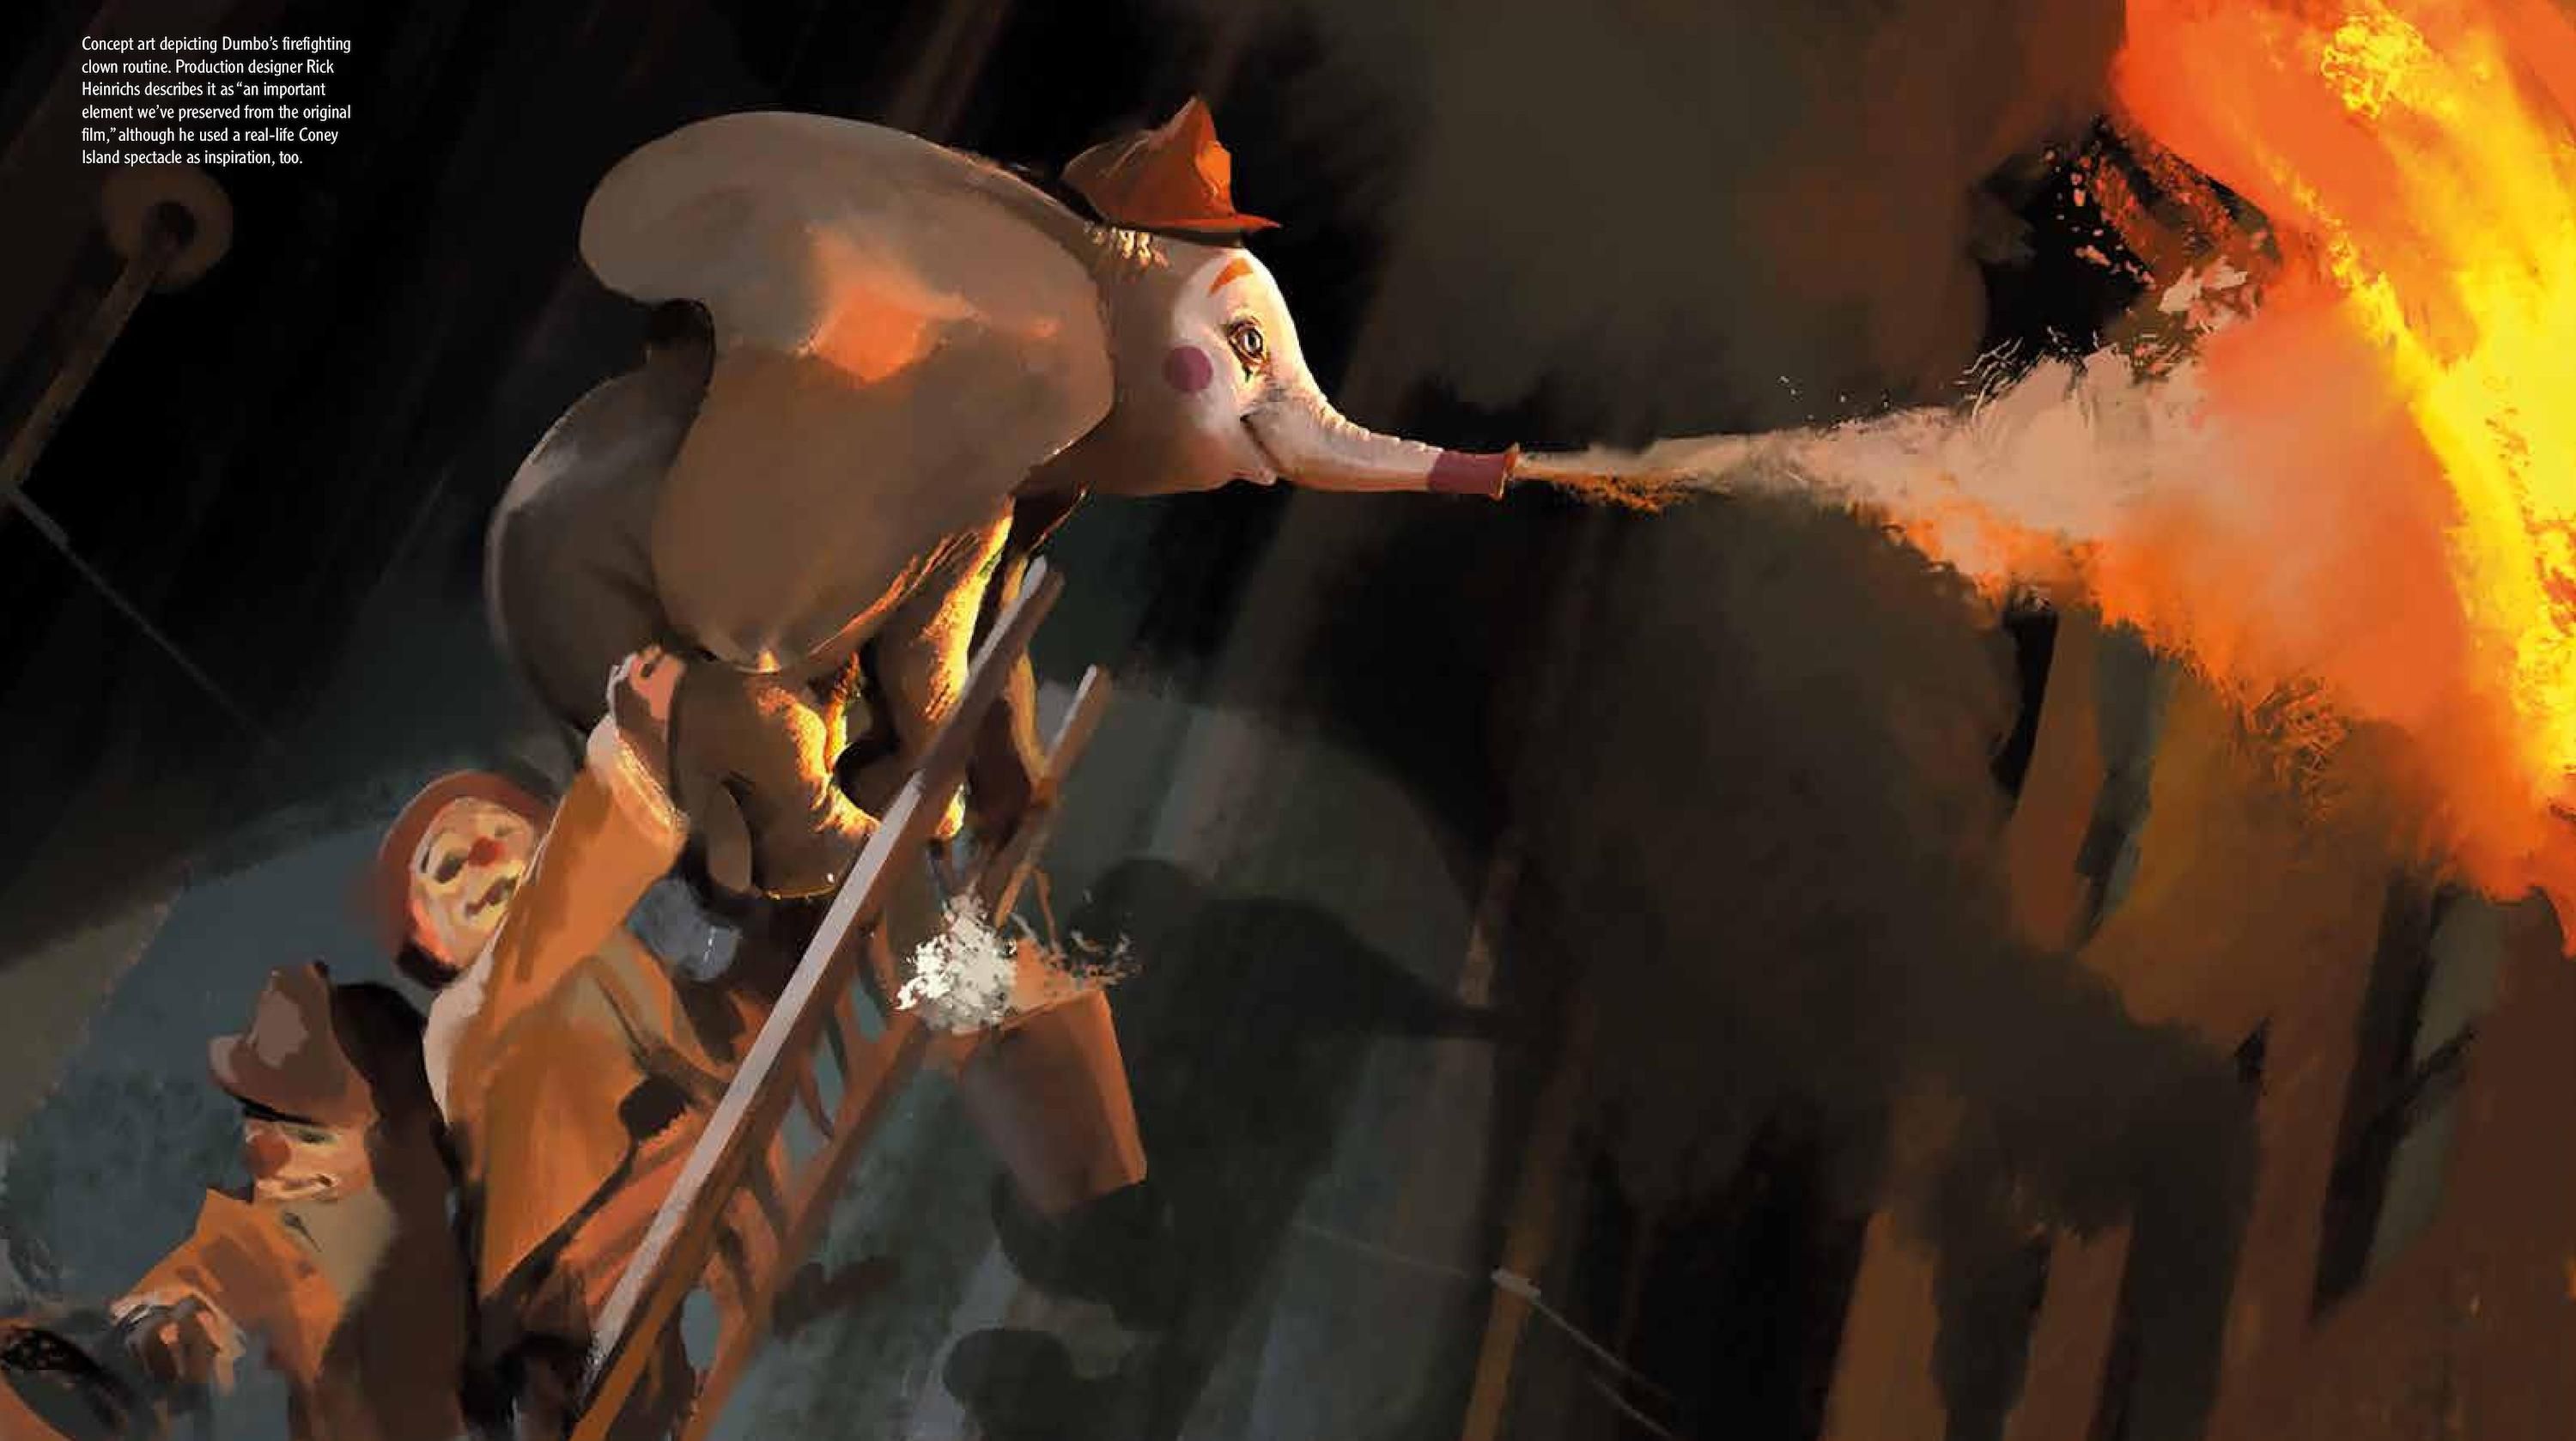 Exclusive Concept Art From Disney’s Live-Action Dumbo